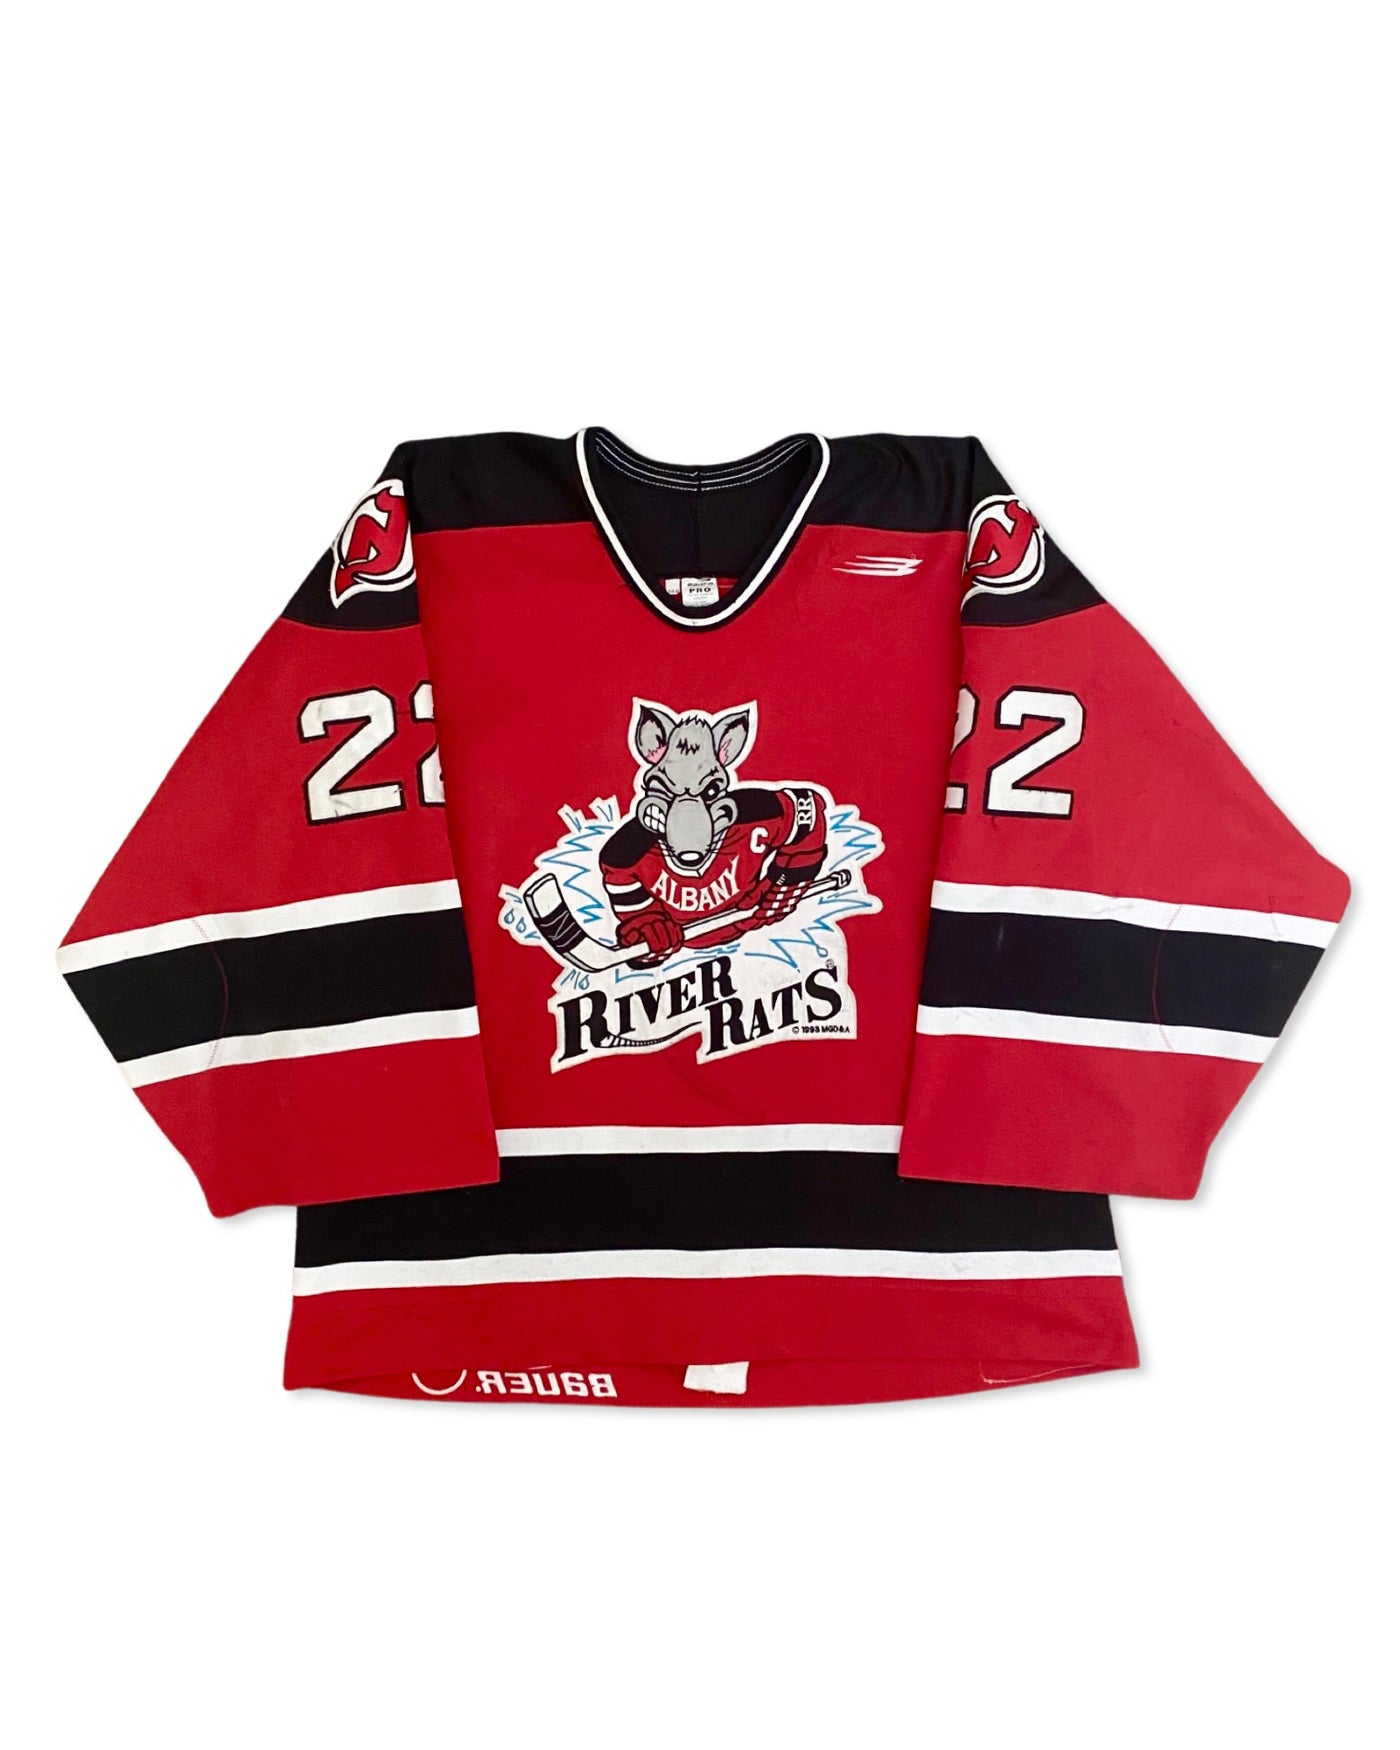 Vintage 1997 Game Worn Albany River Rats Bauer Jersey